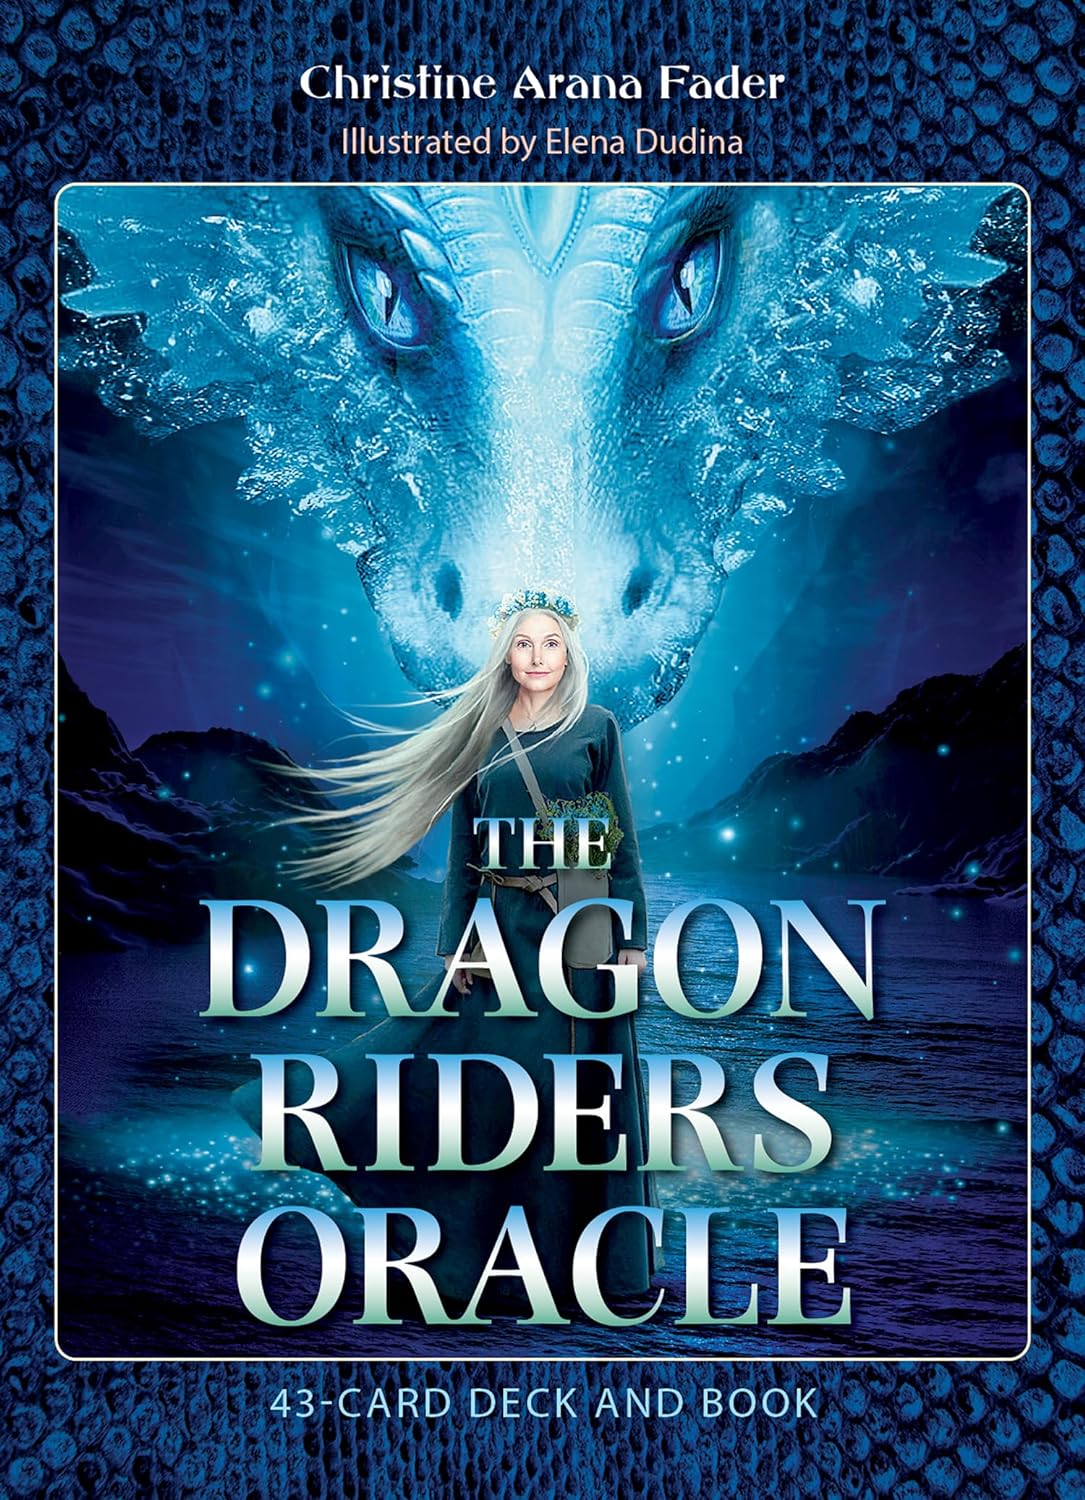 The Dragon Rider Oracle